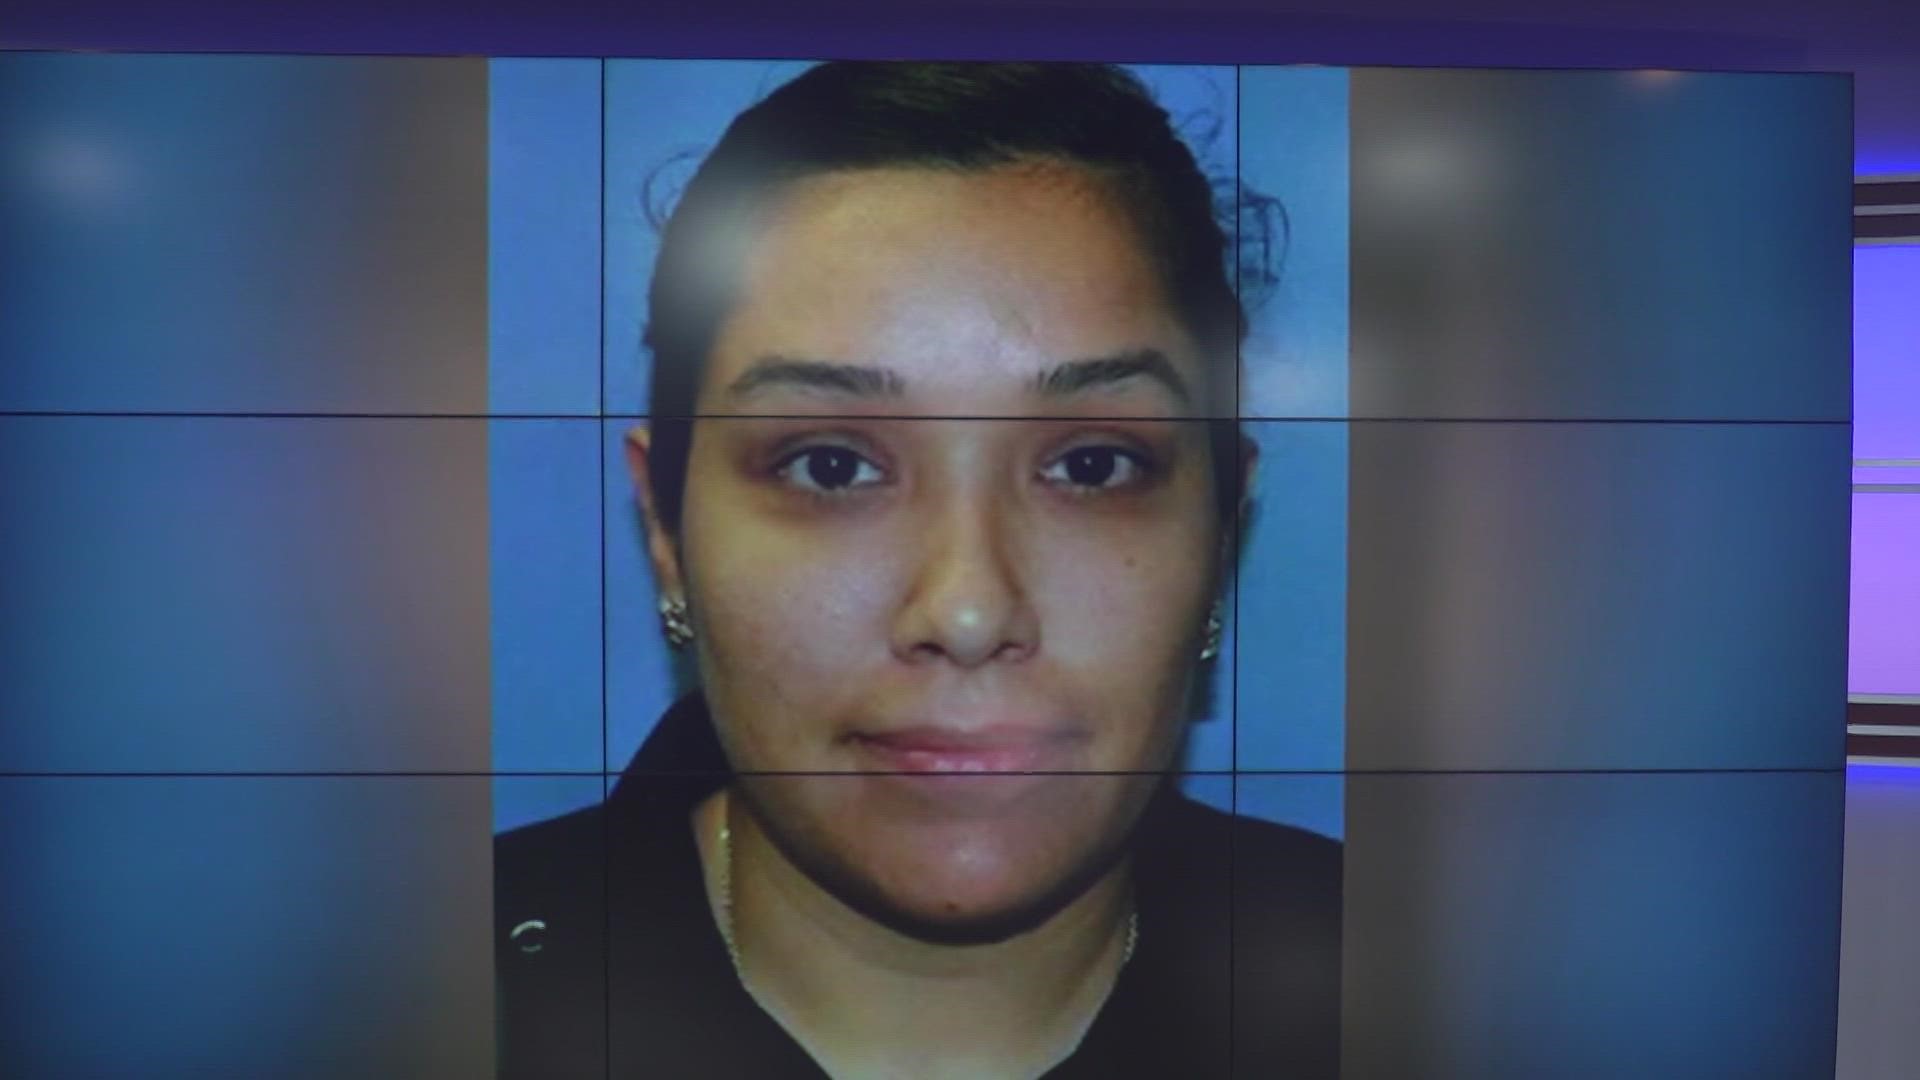 Elizabeth Montoya may rejoin the police force after a third-party ruled her firing was too severe a punishment.